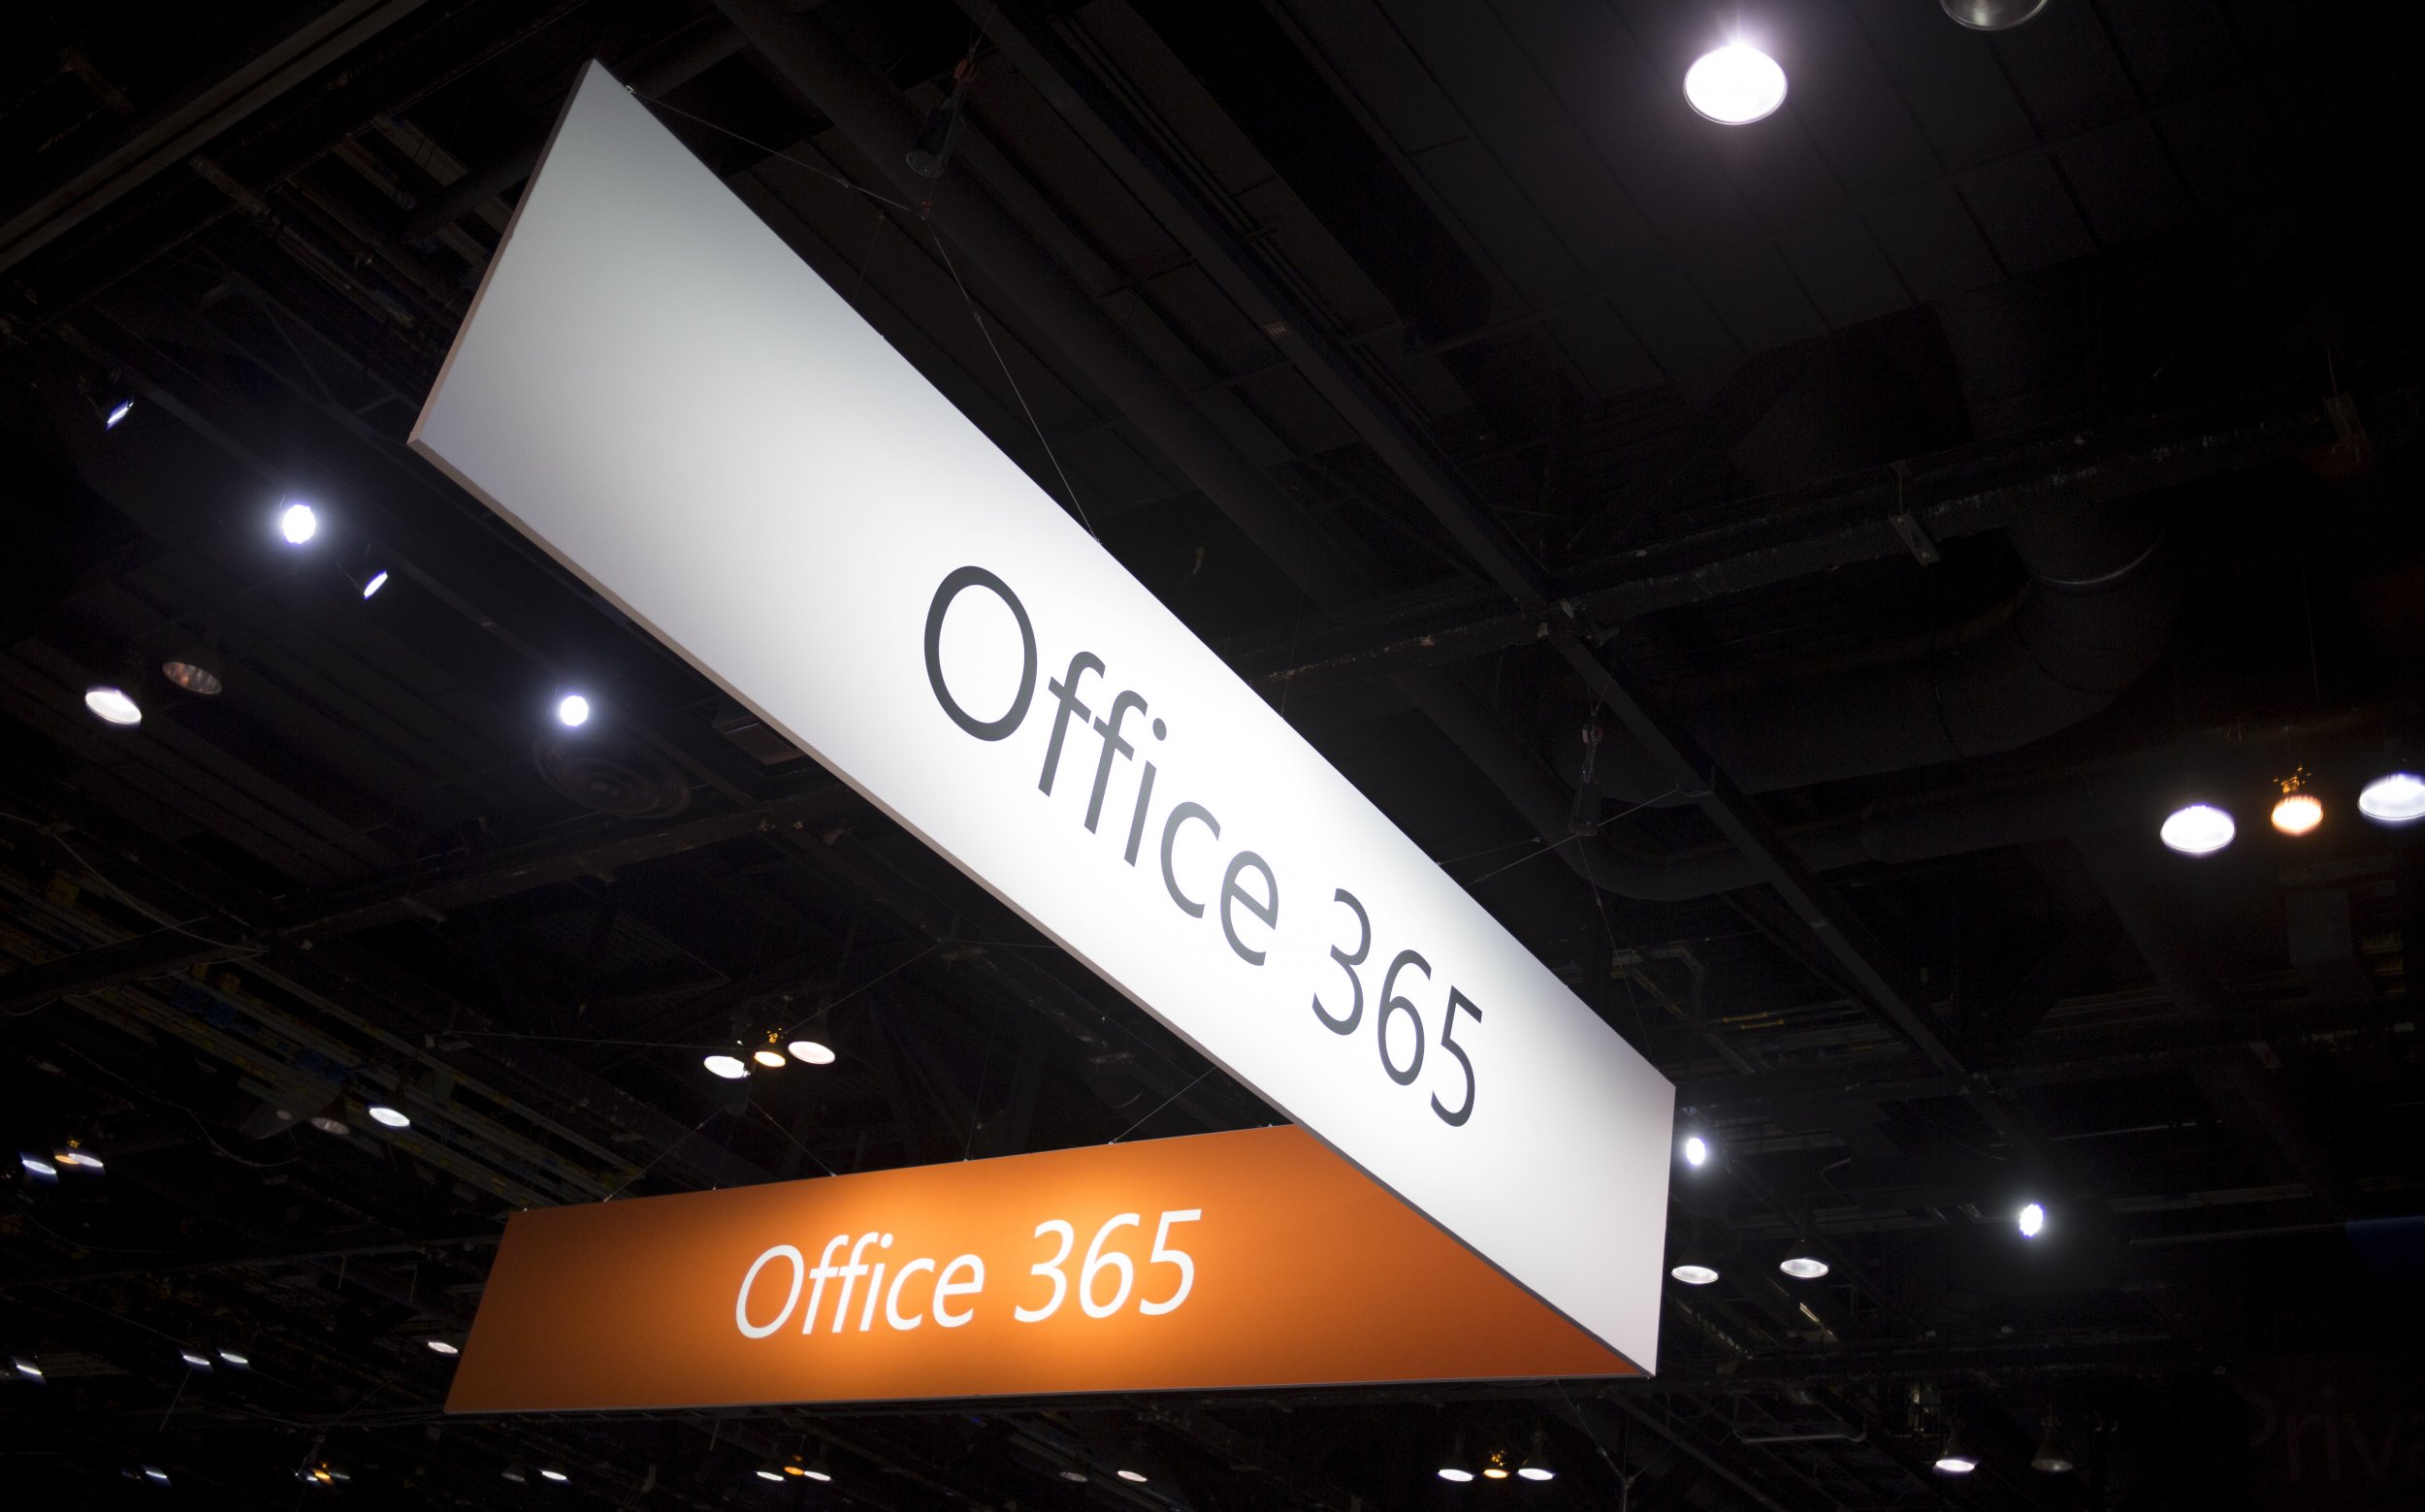 Is Office 365 Down? Users Were Unable to Access Admin Portal